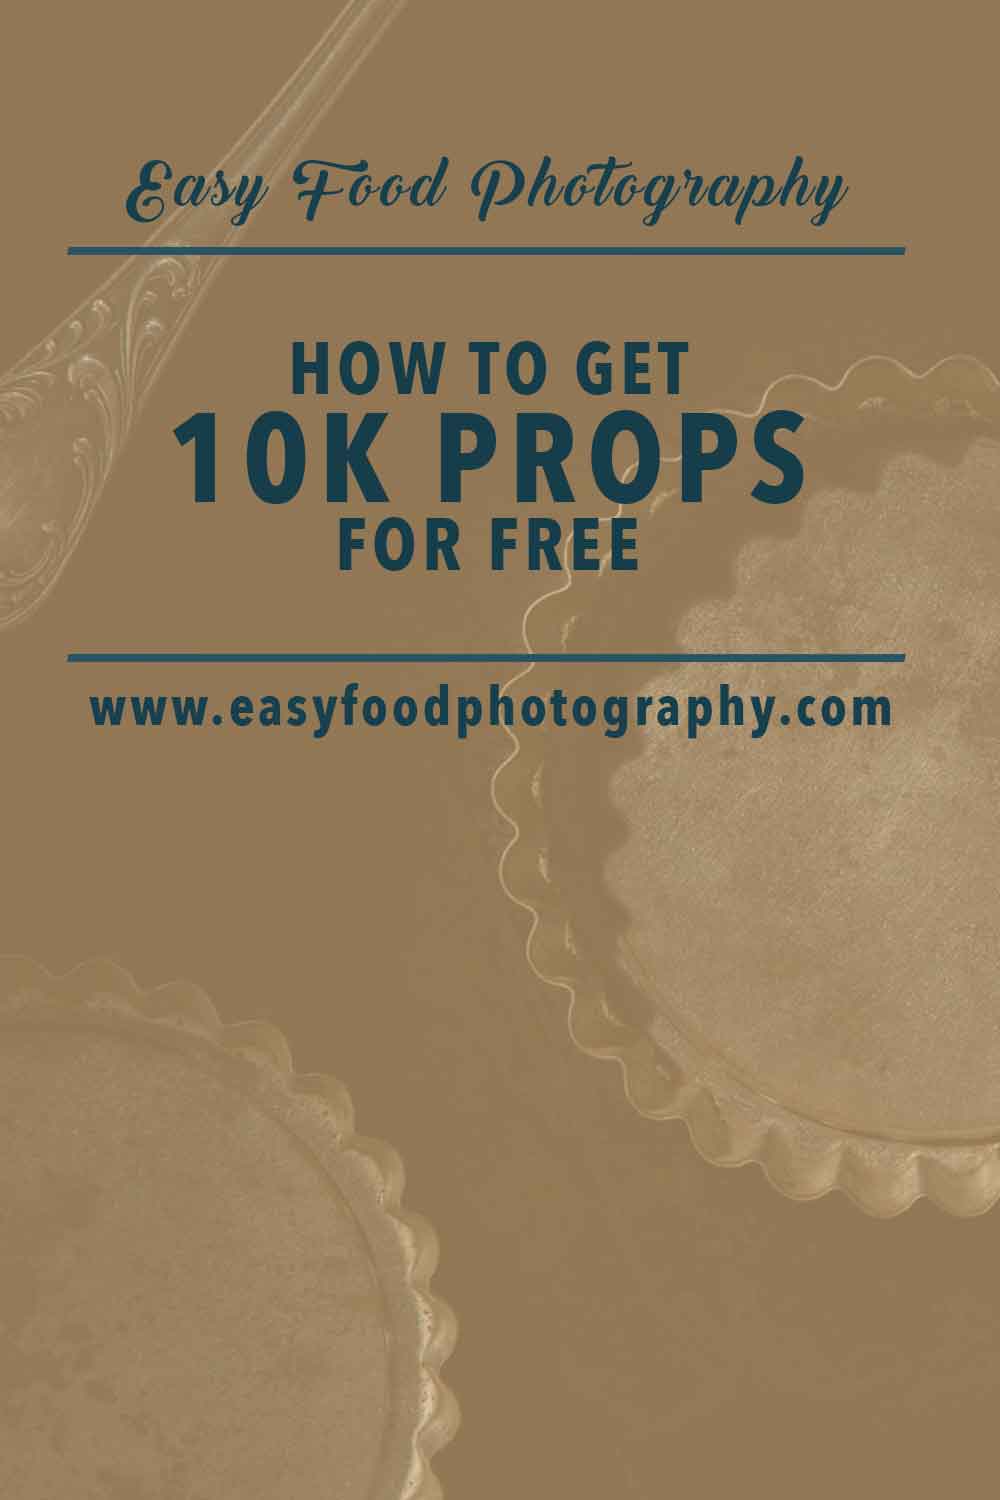 HOW TO ACCESS 10K PROPS FOR FREE